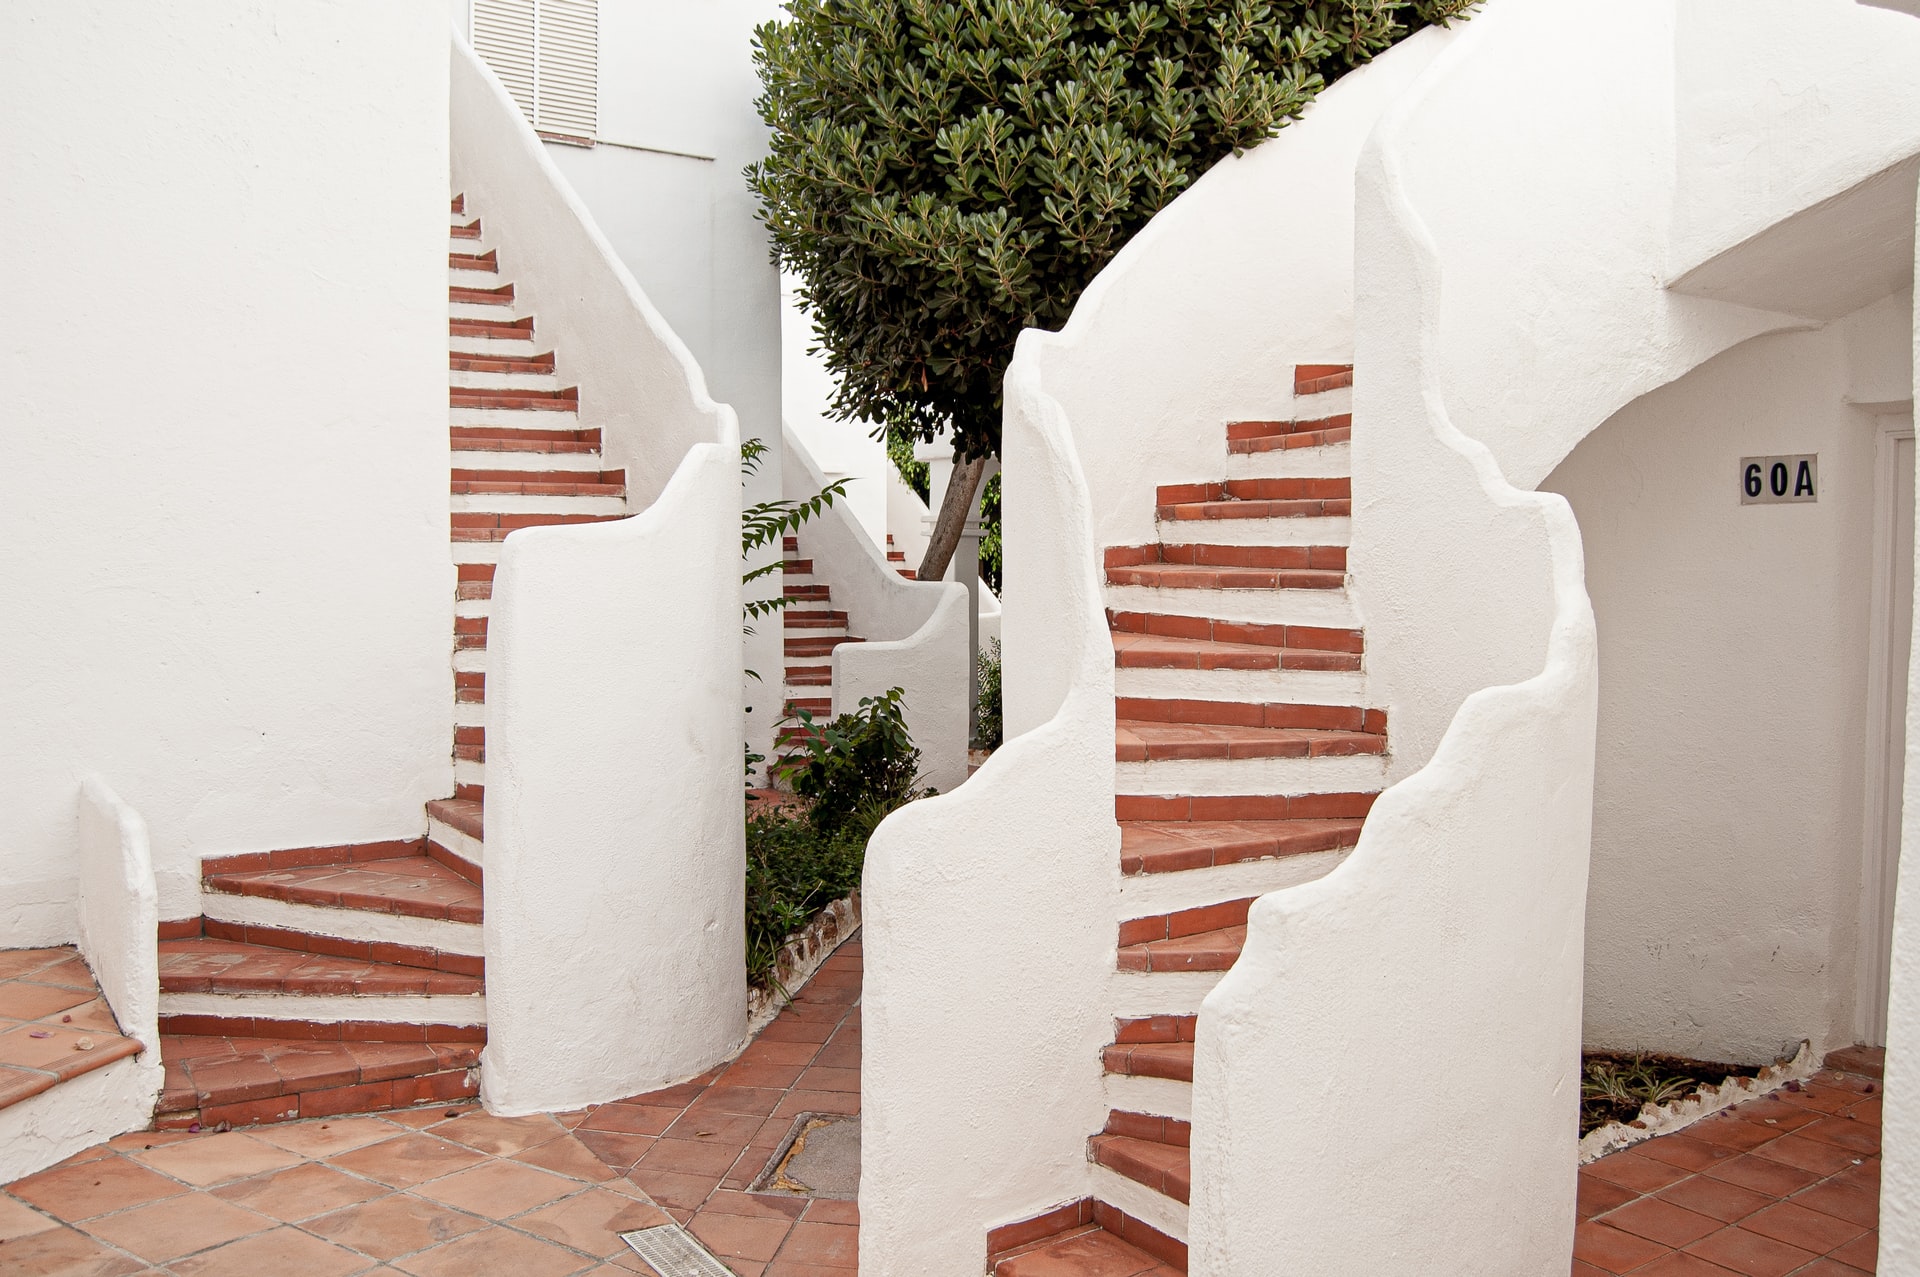 The beauty of simplicity through the architecture of Ibiza